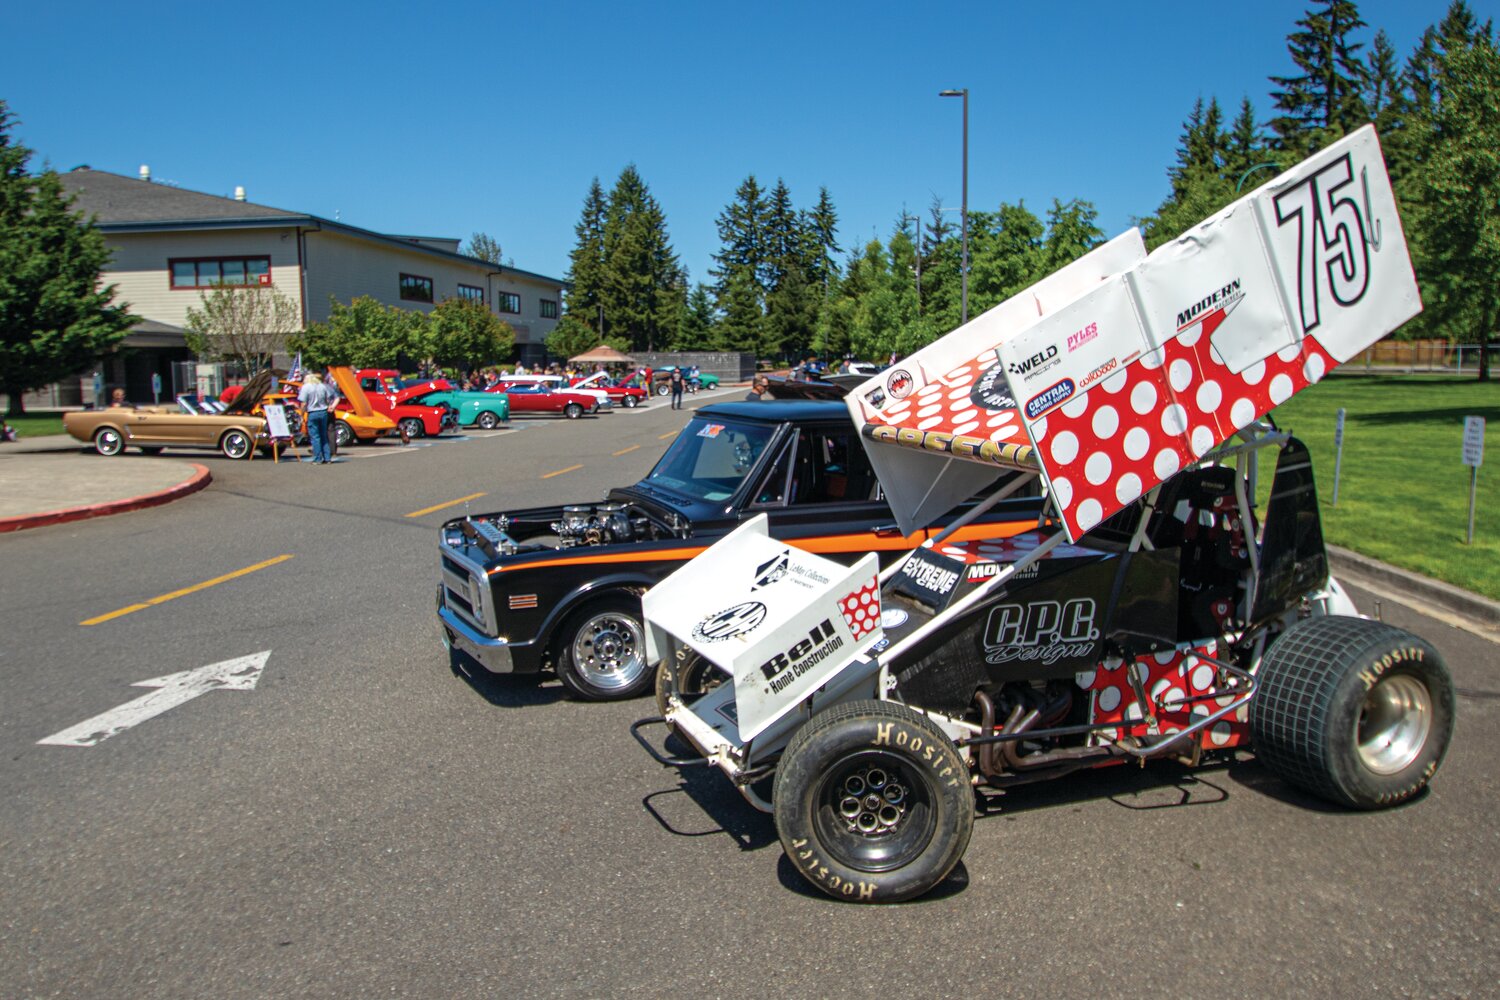 While most brought project cars like classic and muscle cars to the Yelm High School car show on June 4, Chris Greene, of Spanaway, decided to showcase his sprint car which he races on dirt tracks throughout western Washington.